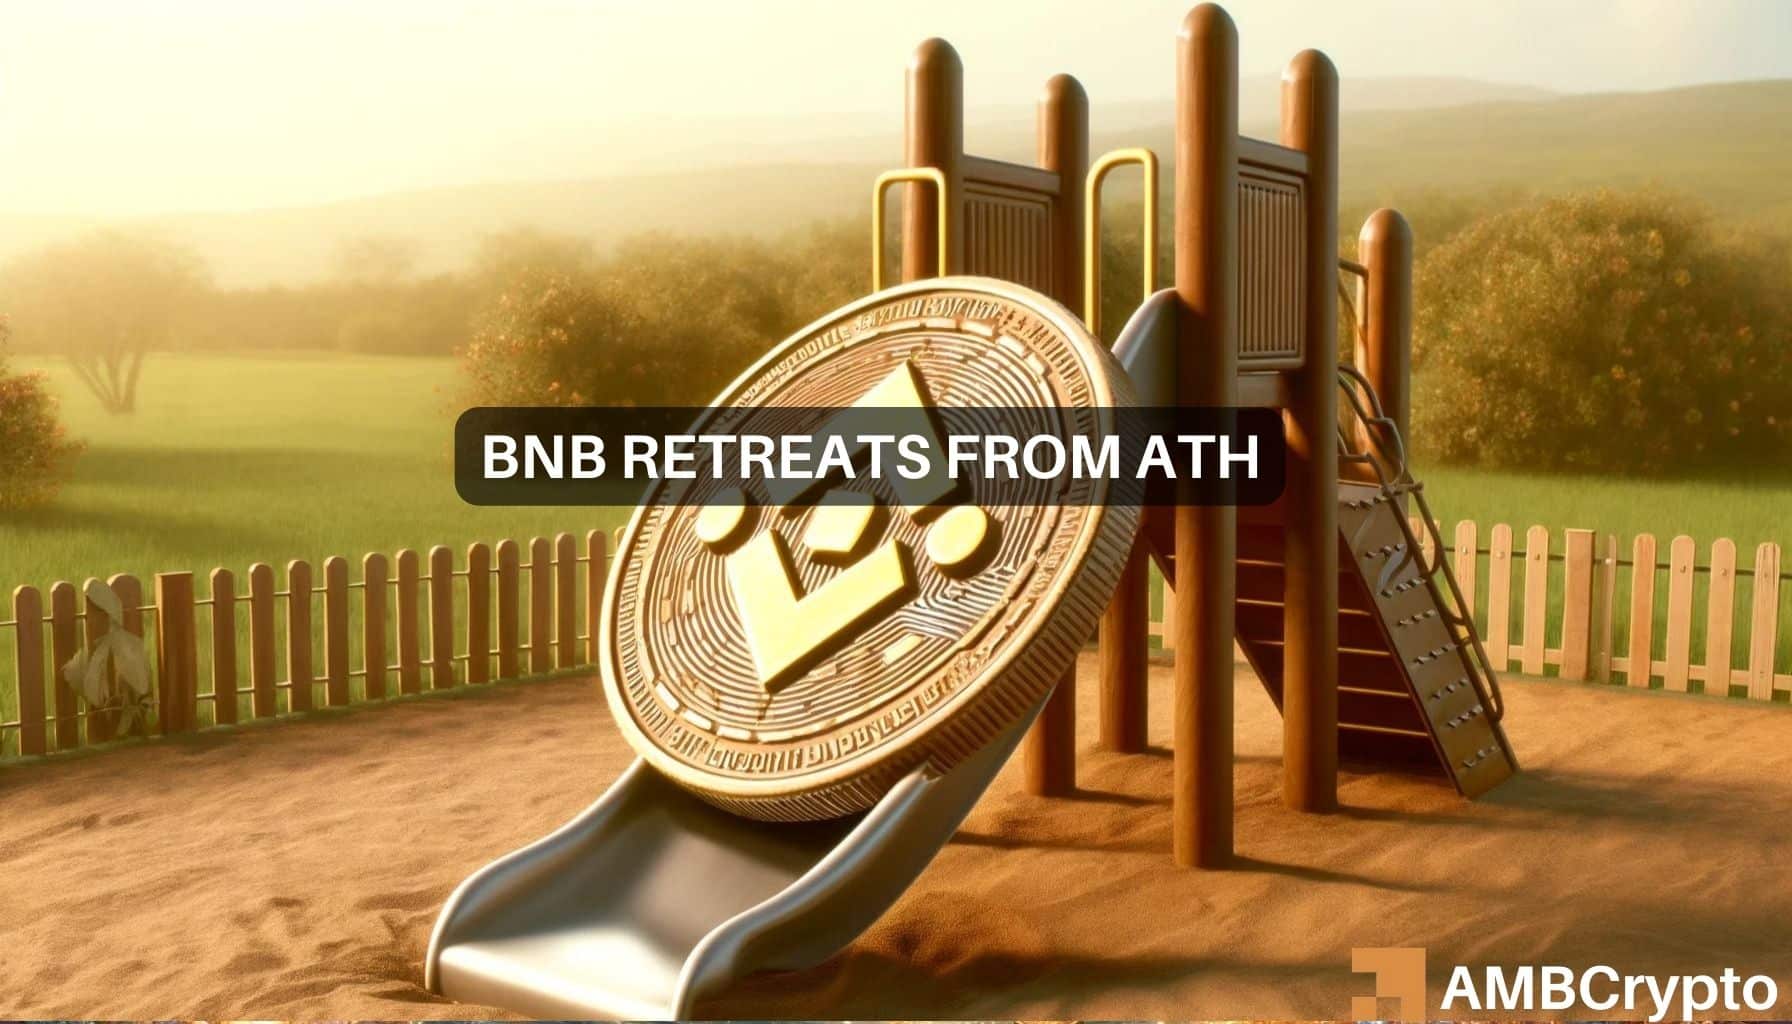 BNB backslides after hitting ATH: What to expect this week